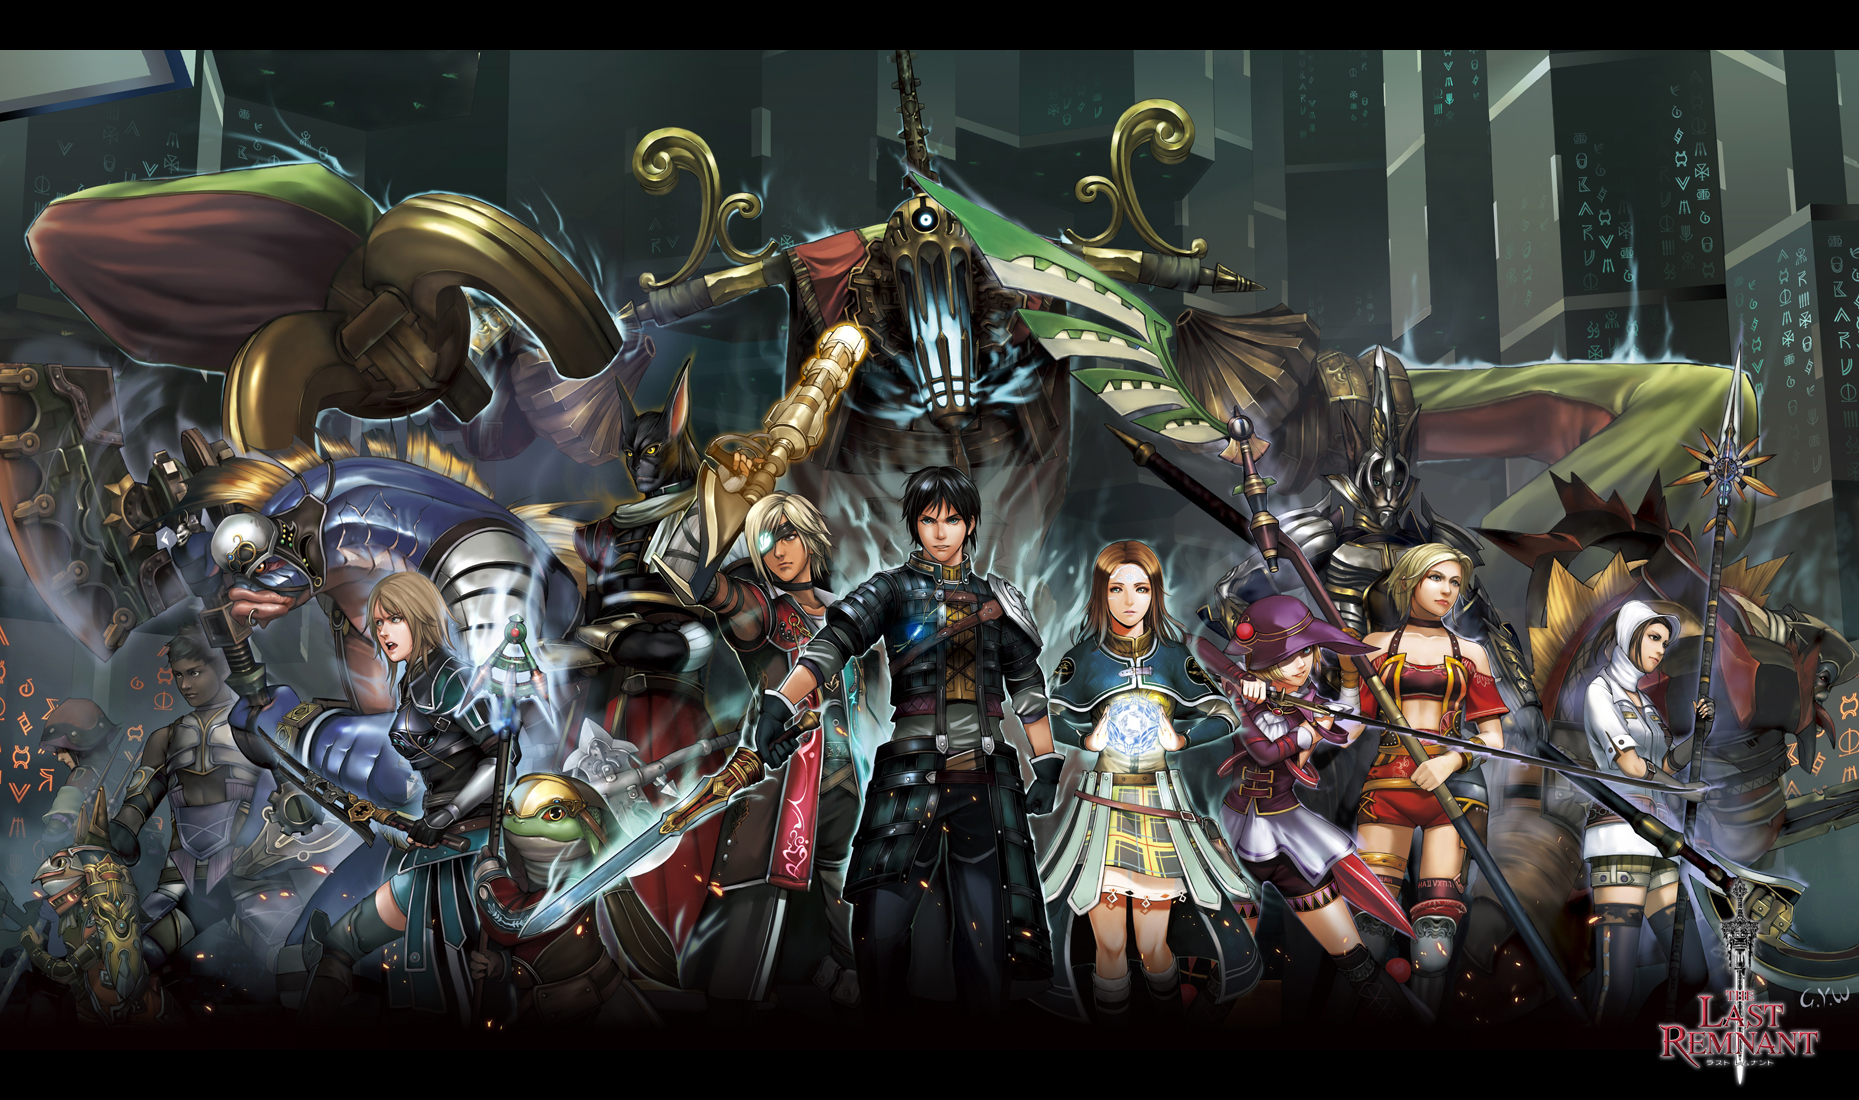 The Last Remnant #17